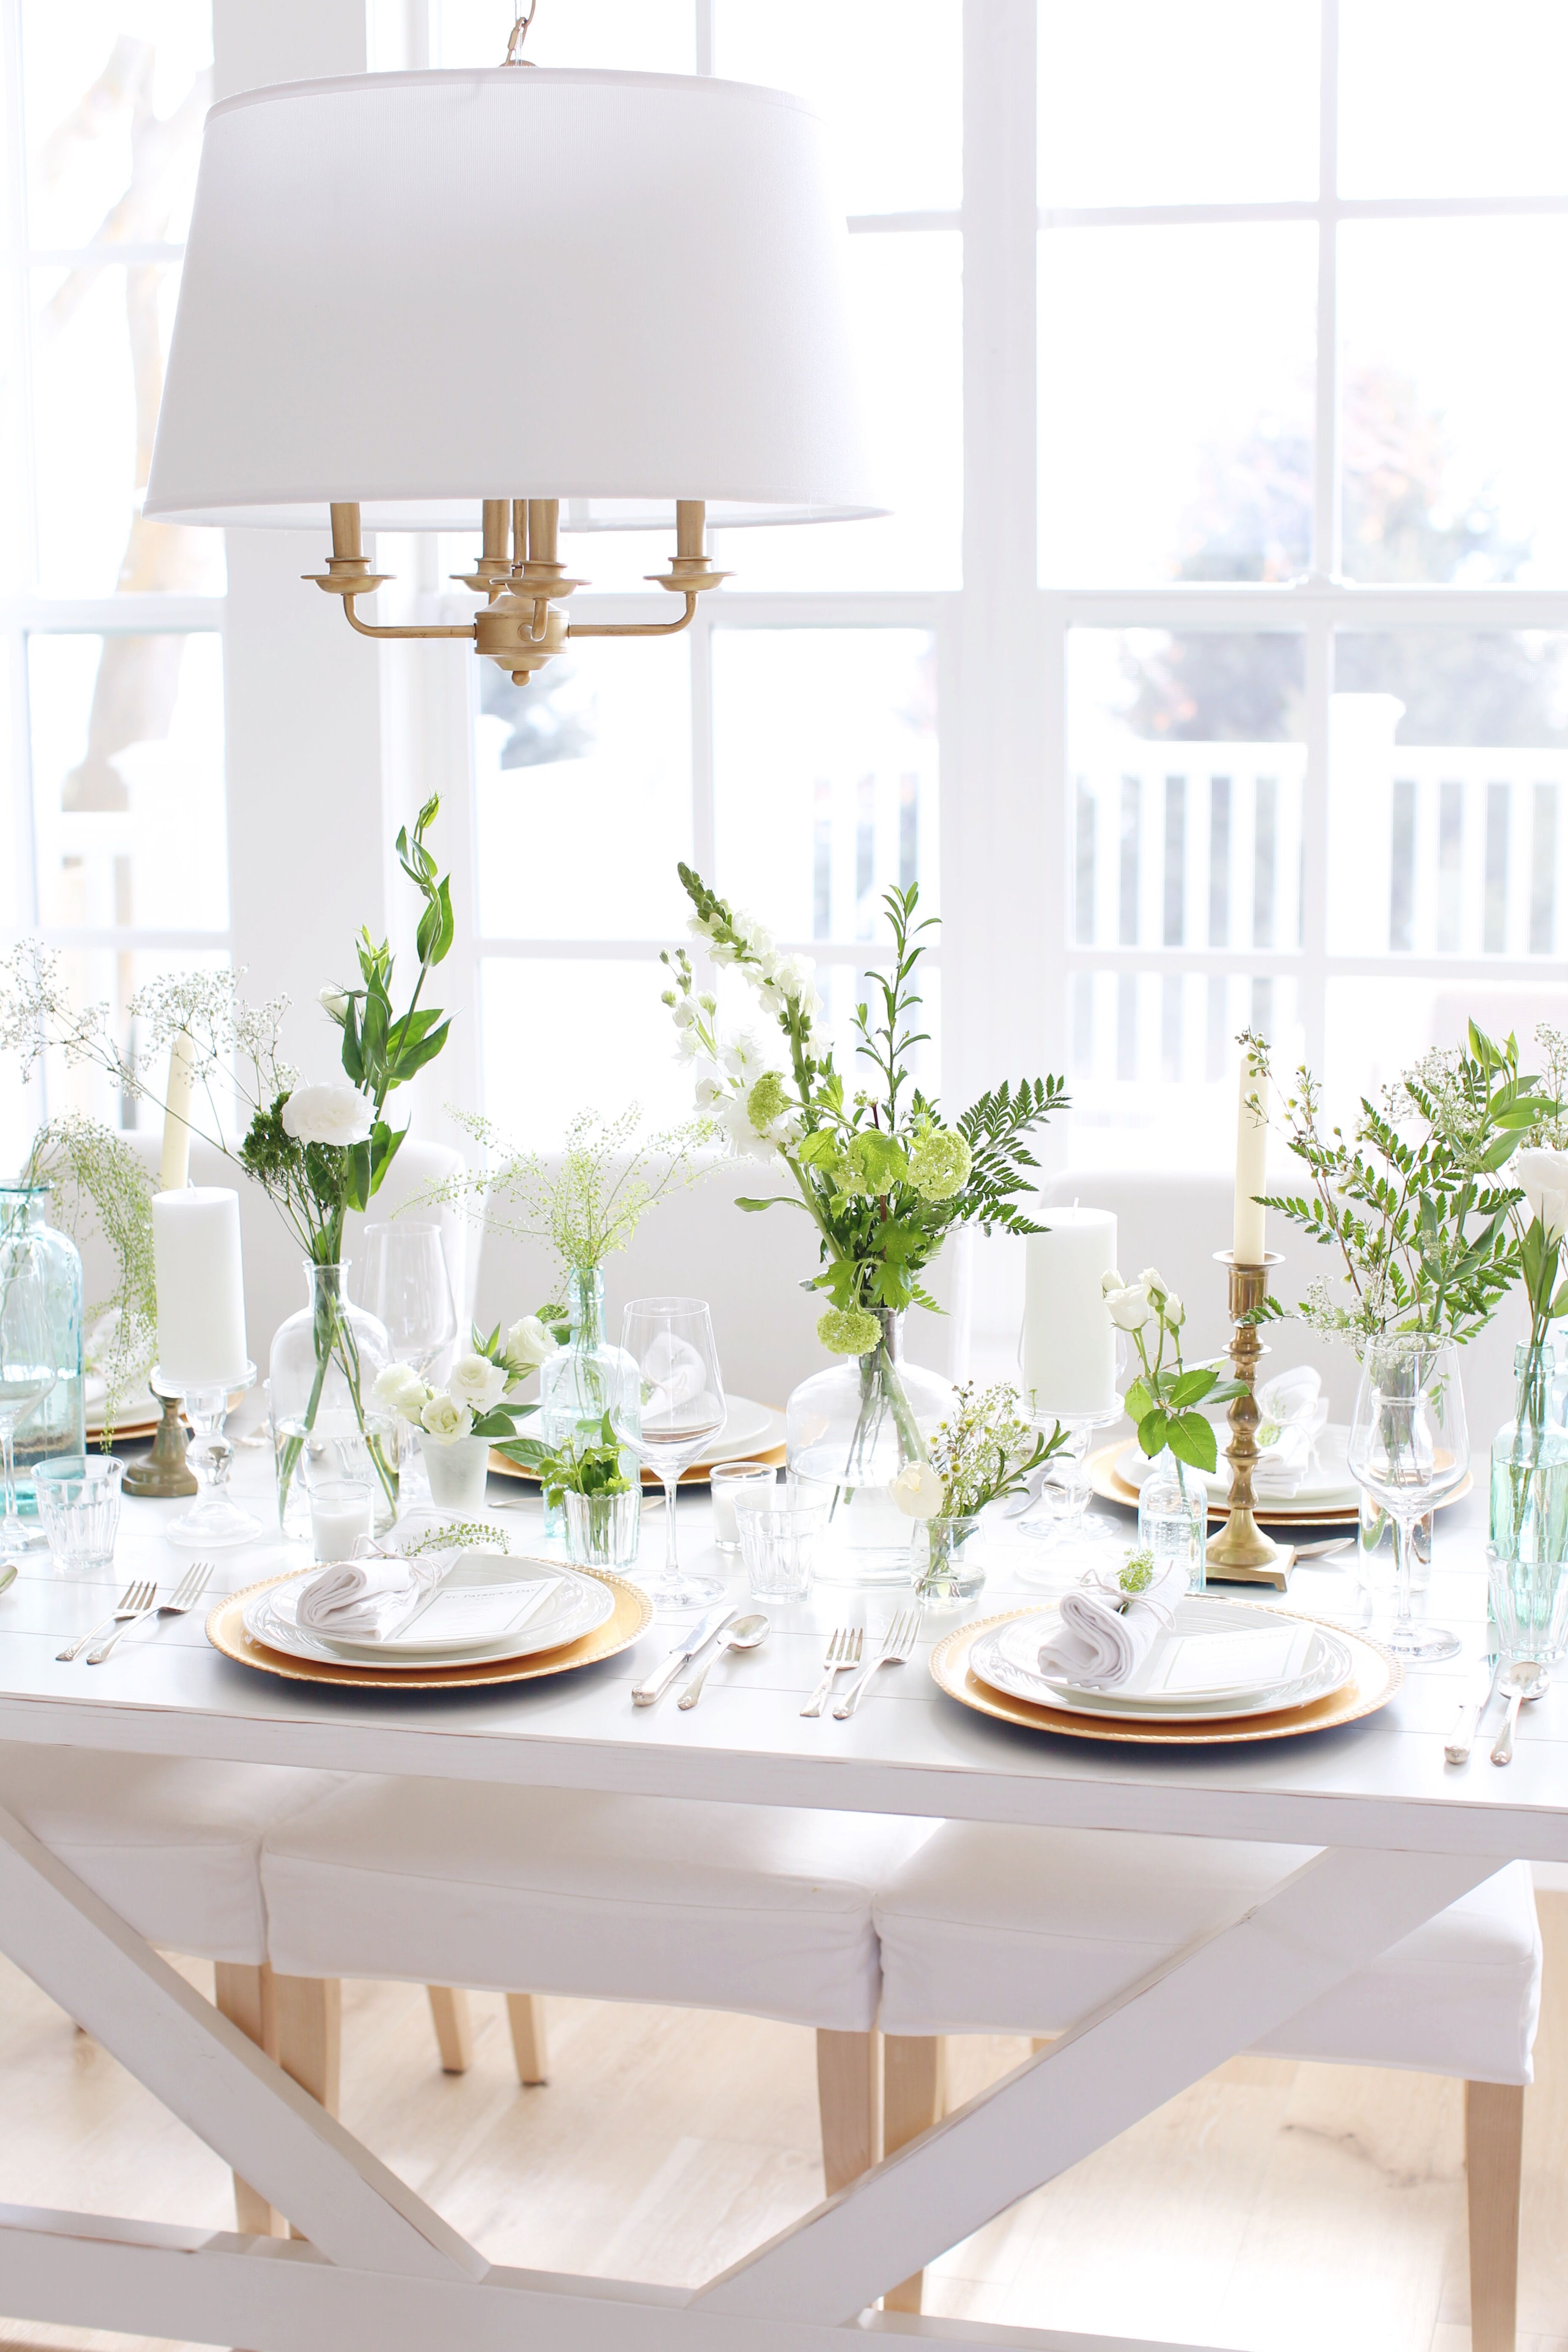 St. Patrick's Day Table Setting inspiration with gold chargers, greenery, green glass and white linens - that is also perfect for a light green and white wedding or dinner party.